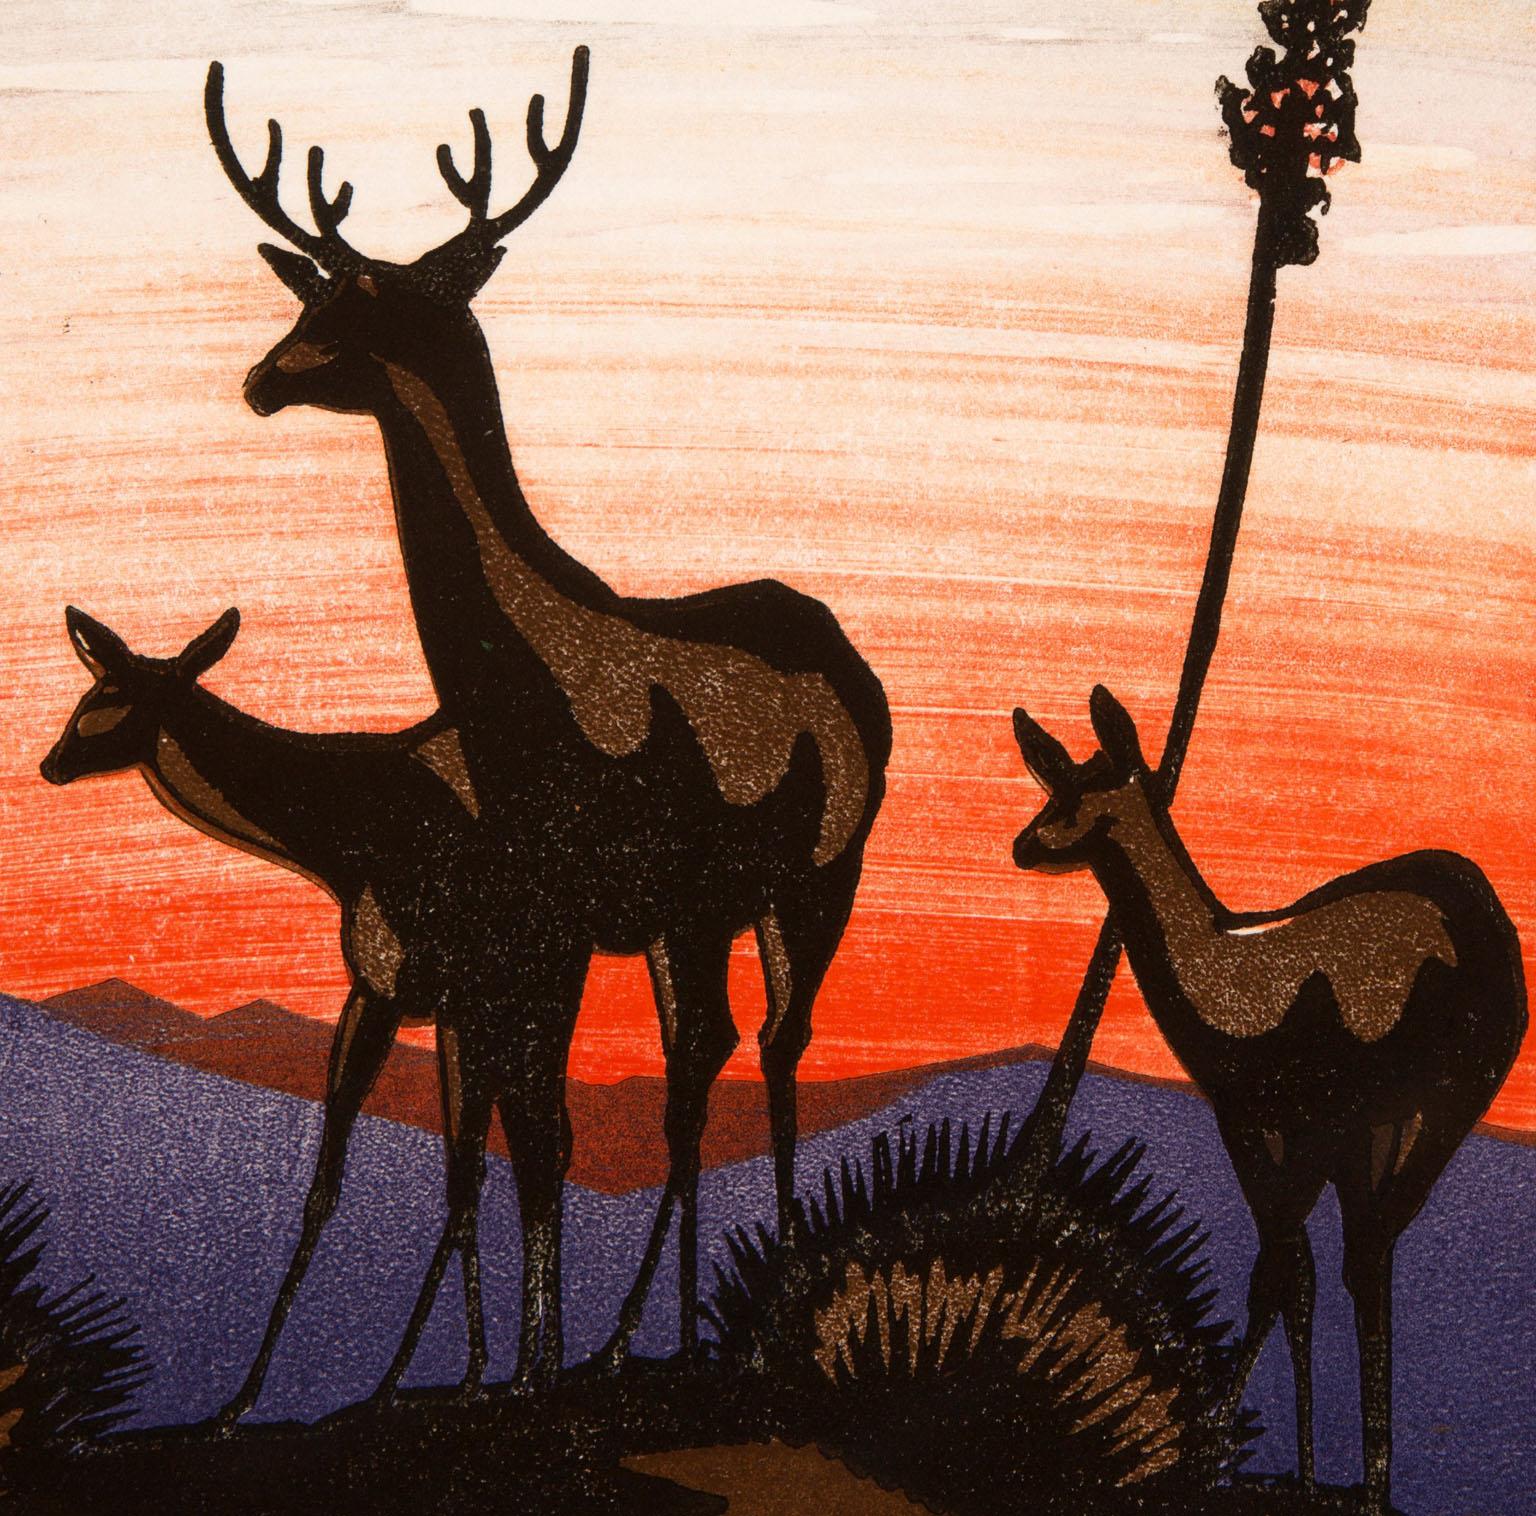 An extremely vibrant and beautiful color woodcut of three deer in front of a brilliant red sky, Santa Barbara artist Helen Seegert's “Evening Watch” (circa 1936) is printed on soft fibrous cream wove paper and is signed “Helen M. Seegert” in the